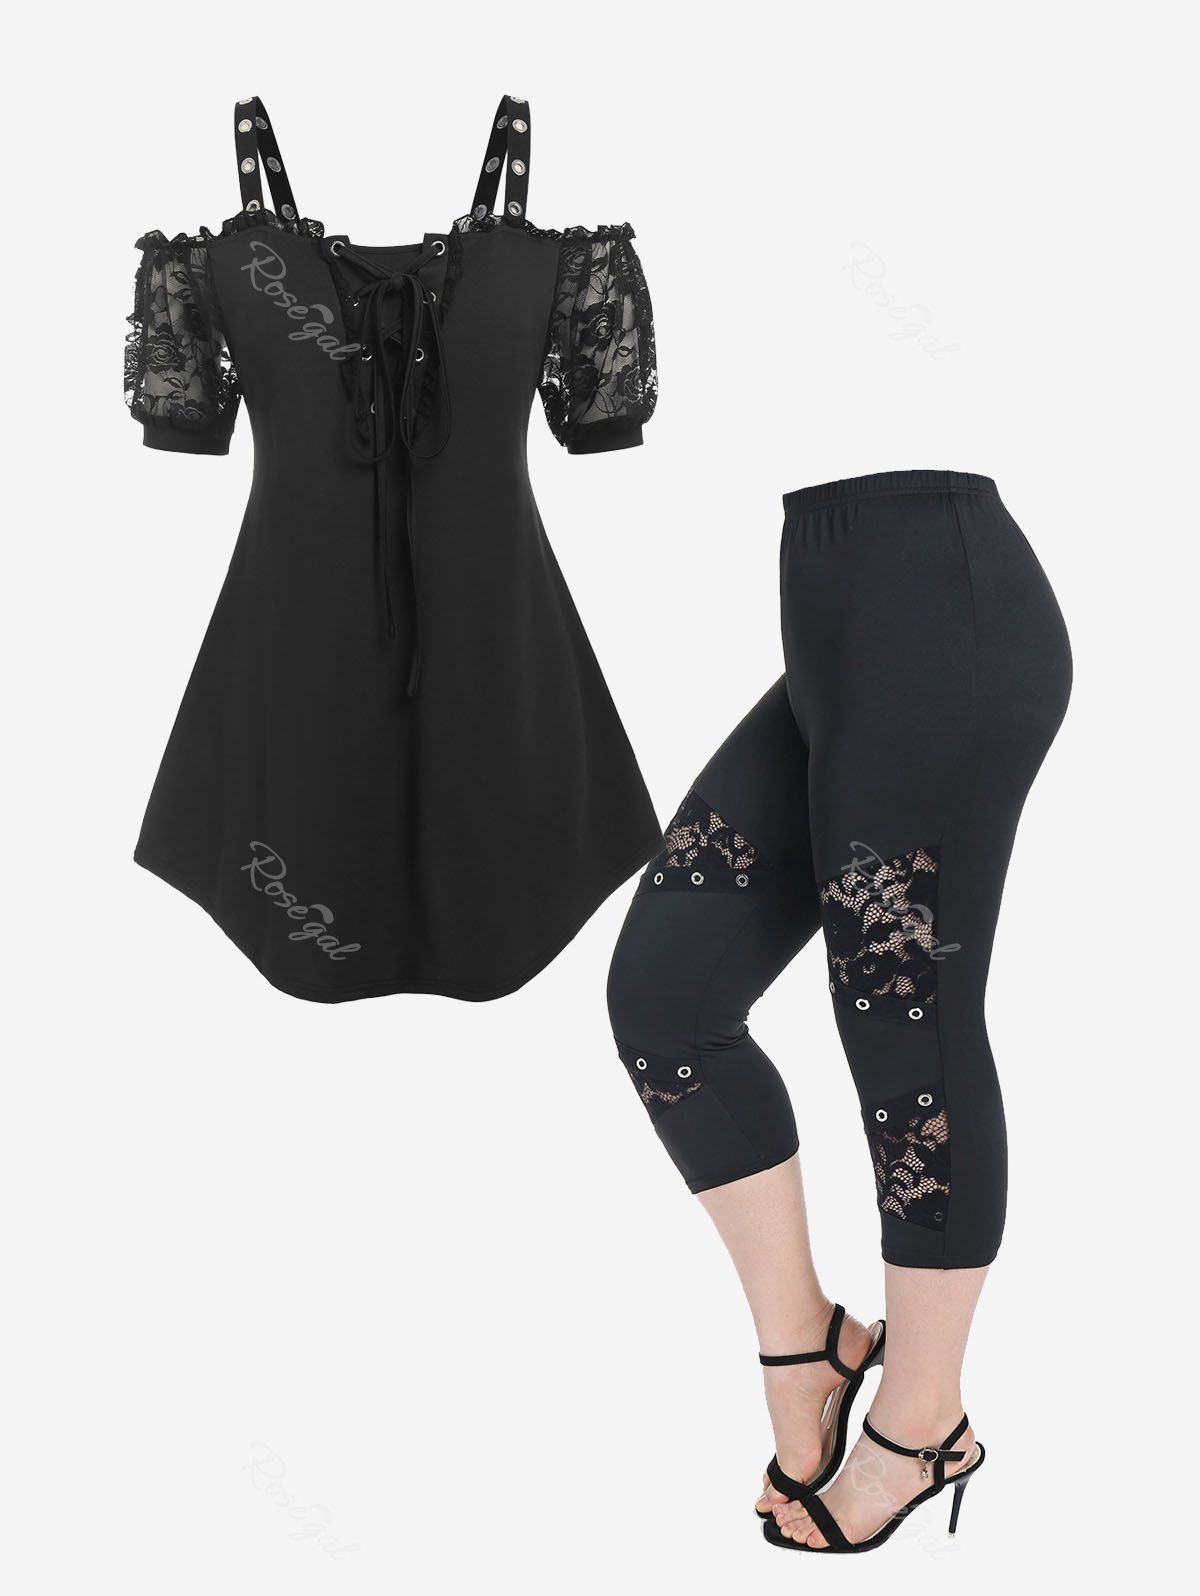 New Lace Insert Lace-up Cold Shoulder Ruffle T Shirt and Lace Panel Grommet High Waisted Leggings Plus Size Summer Outfit  